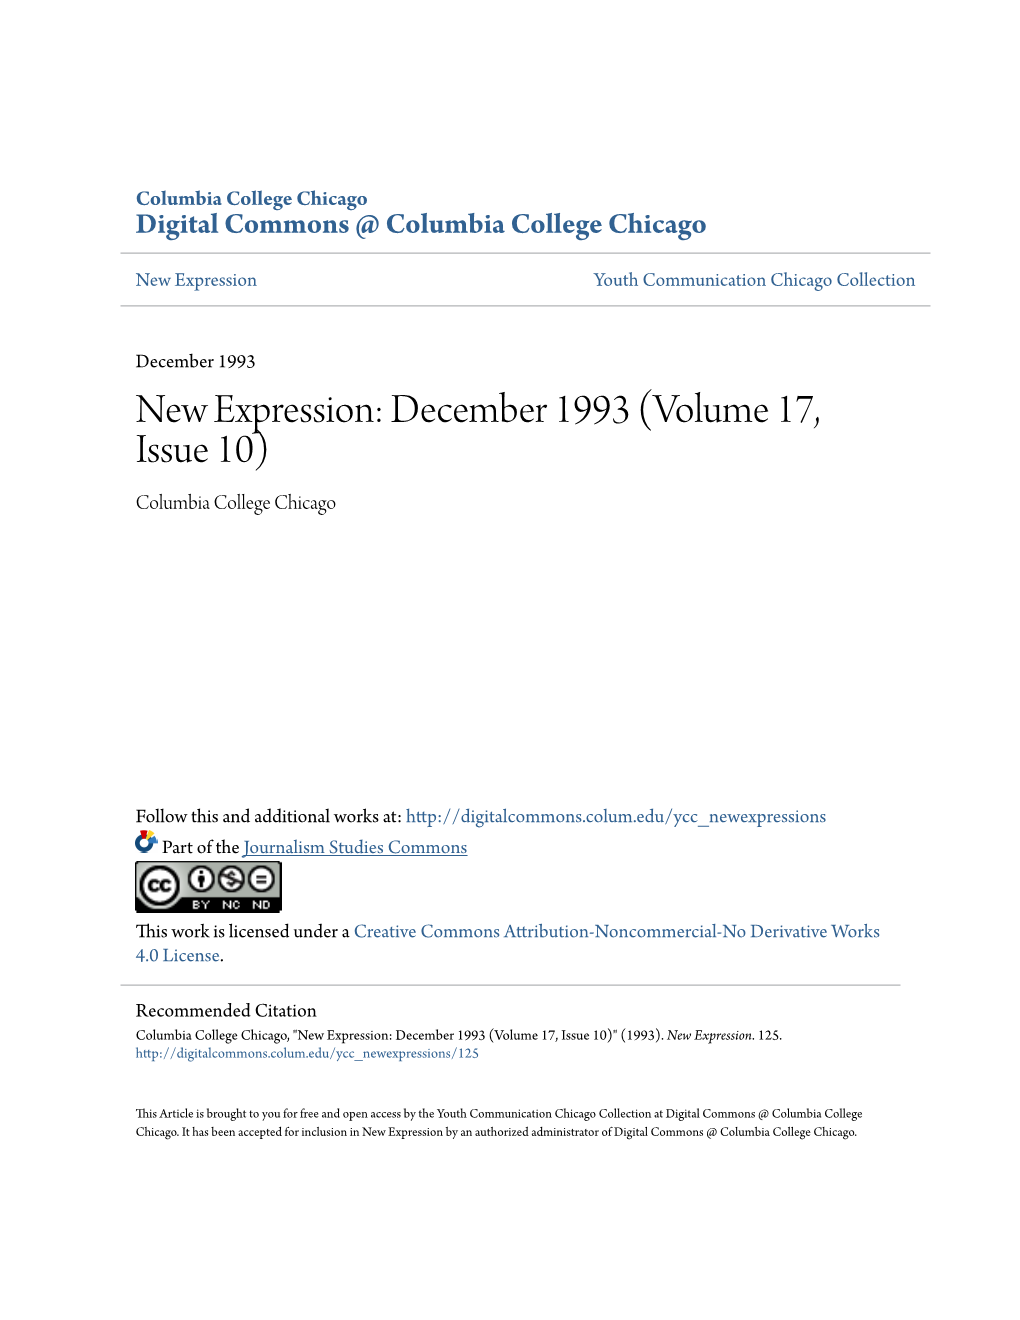 New Expression: December 1993 (Volume 17, Issue 10) Columbia College Chicago